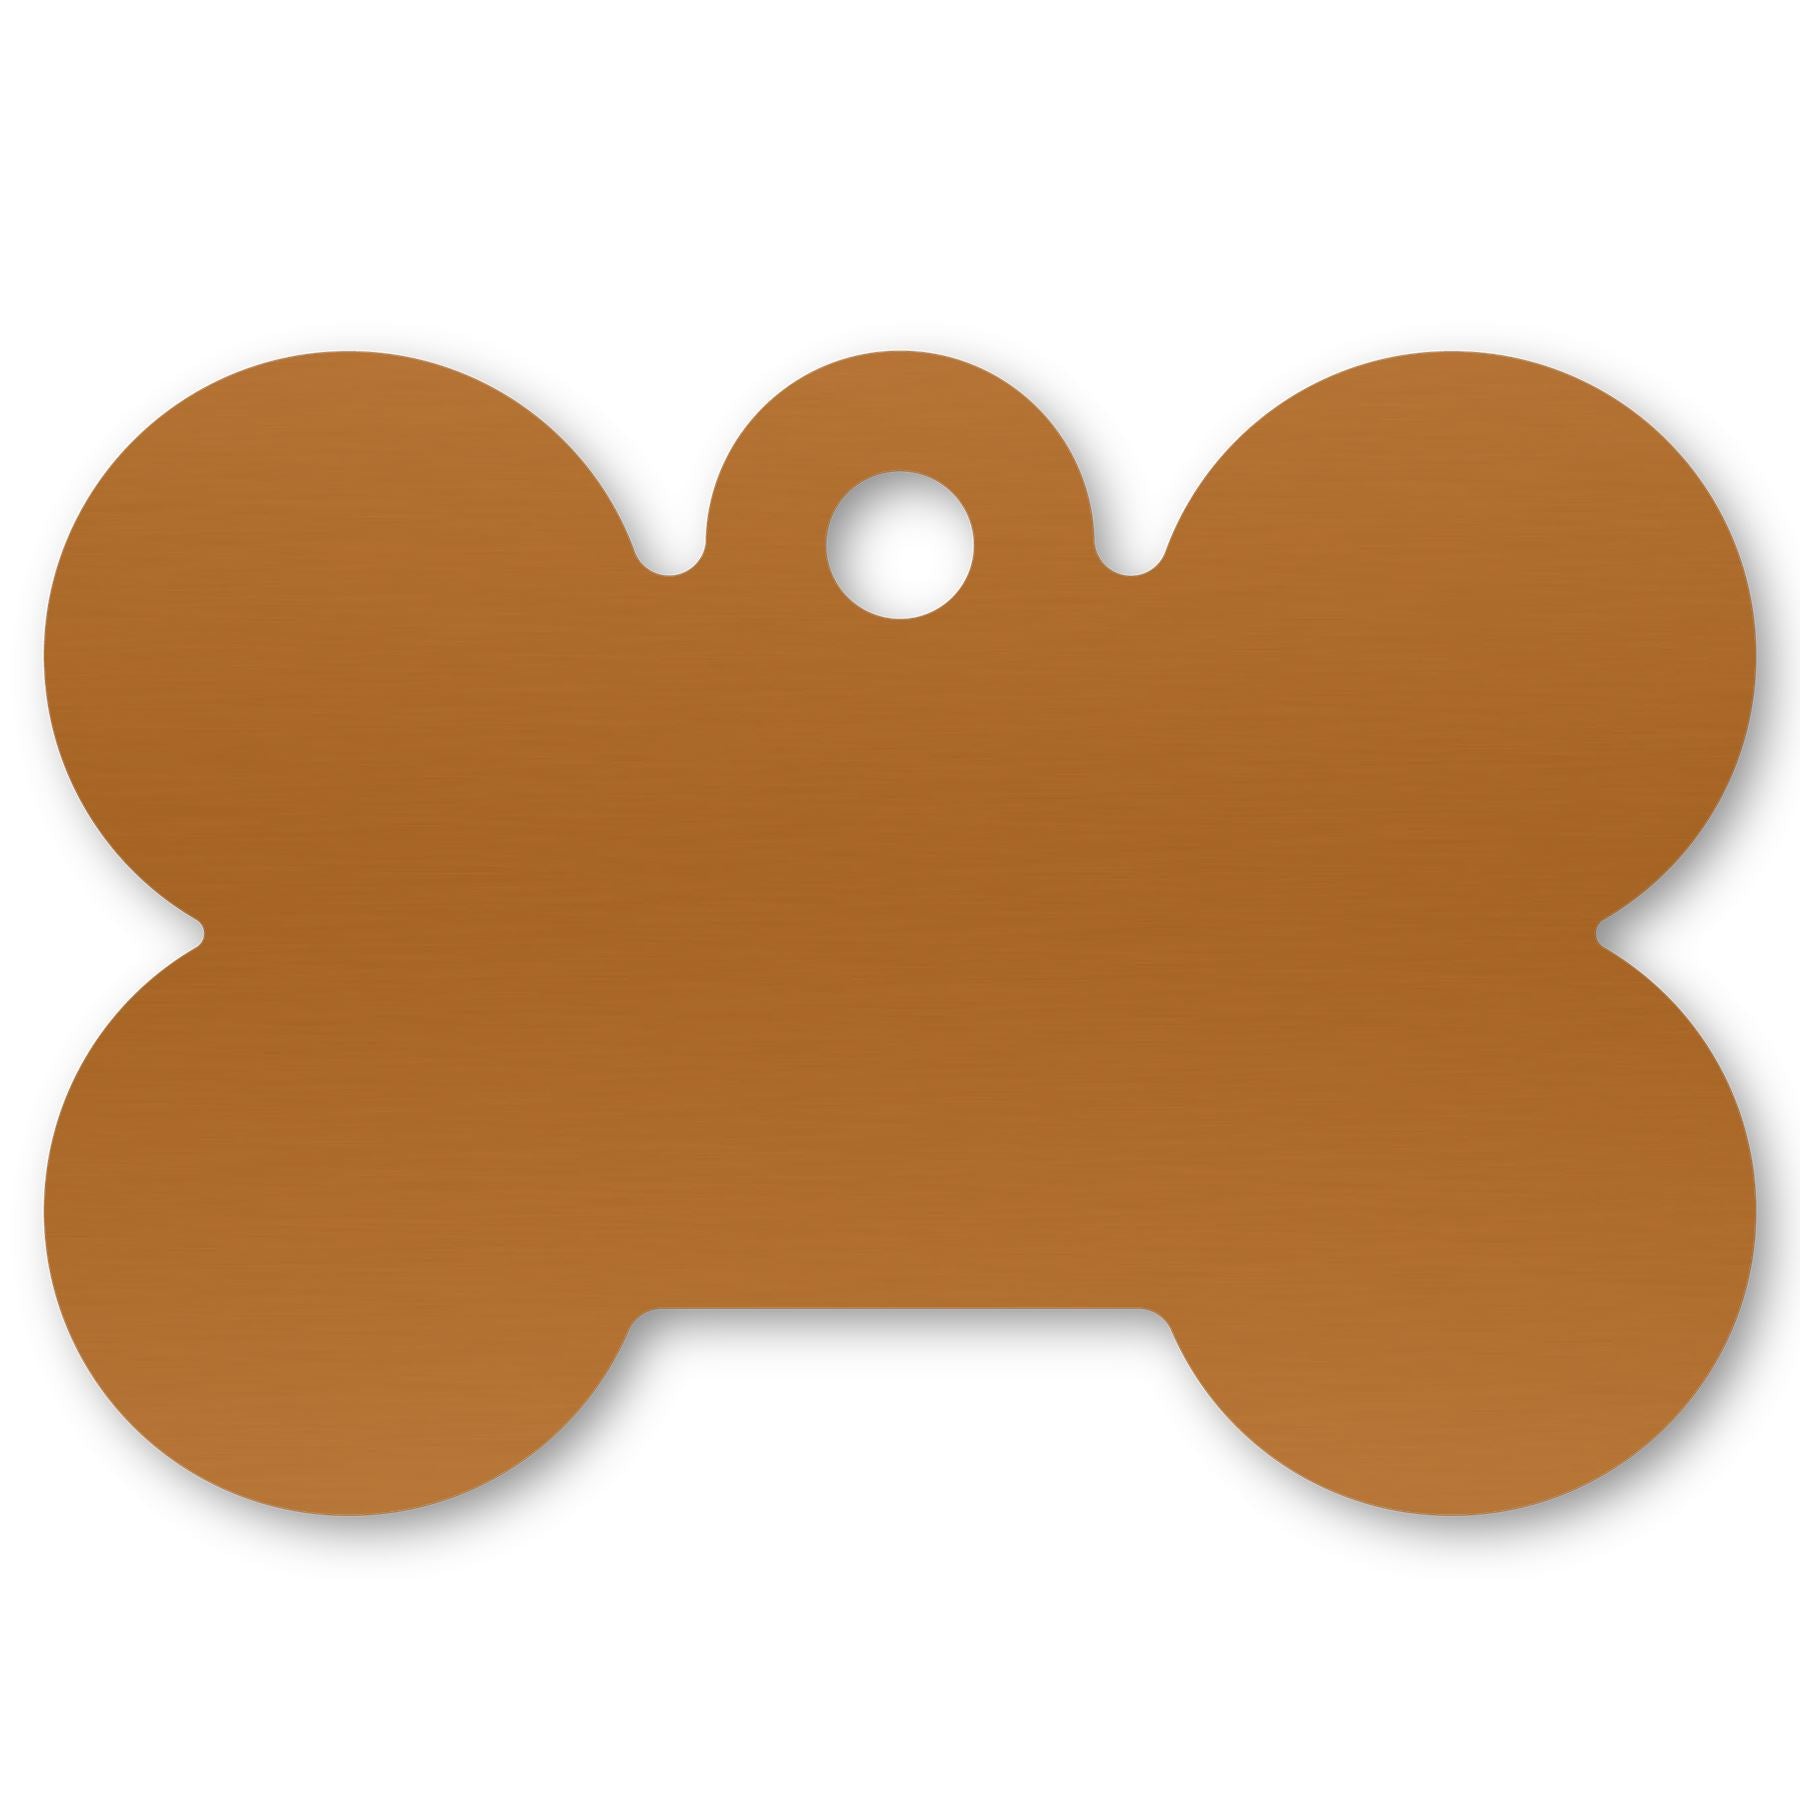 Anodized Aluminum Dog Bone Shaped Tags, 1-3/8" x 2-1/16" with 1/8" Hole, Laser Engraved Metal Tags Craftworks NW Orange 